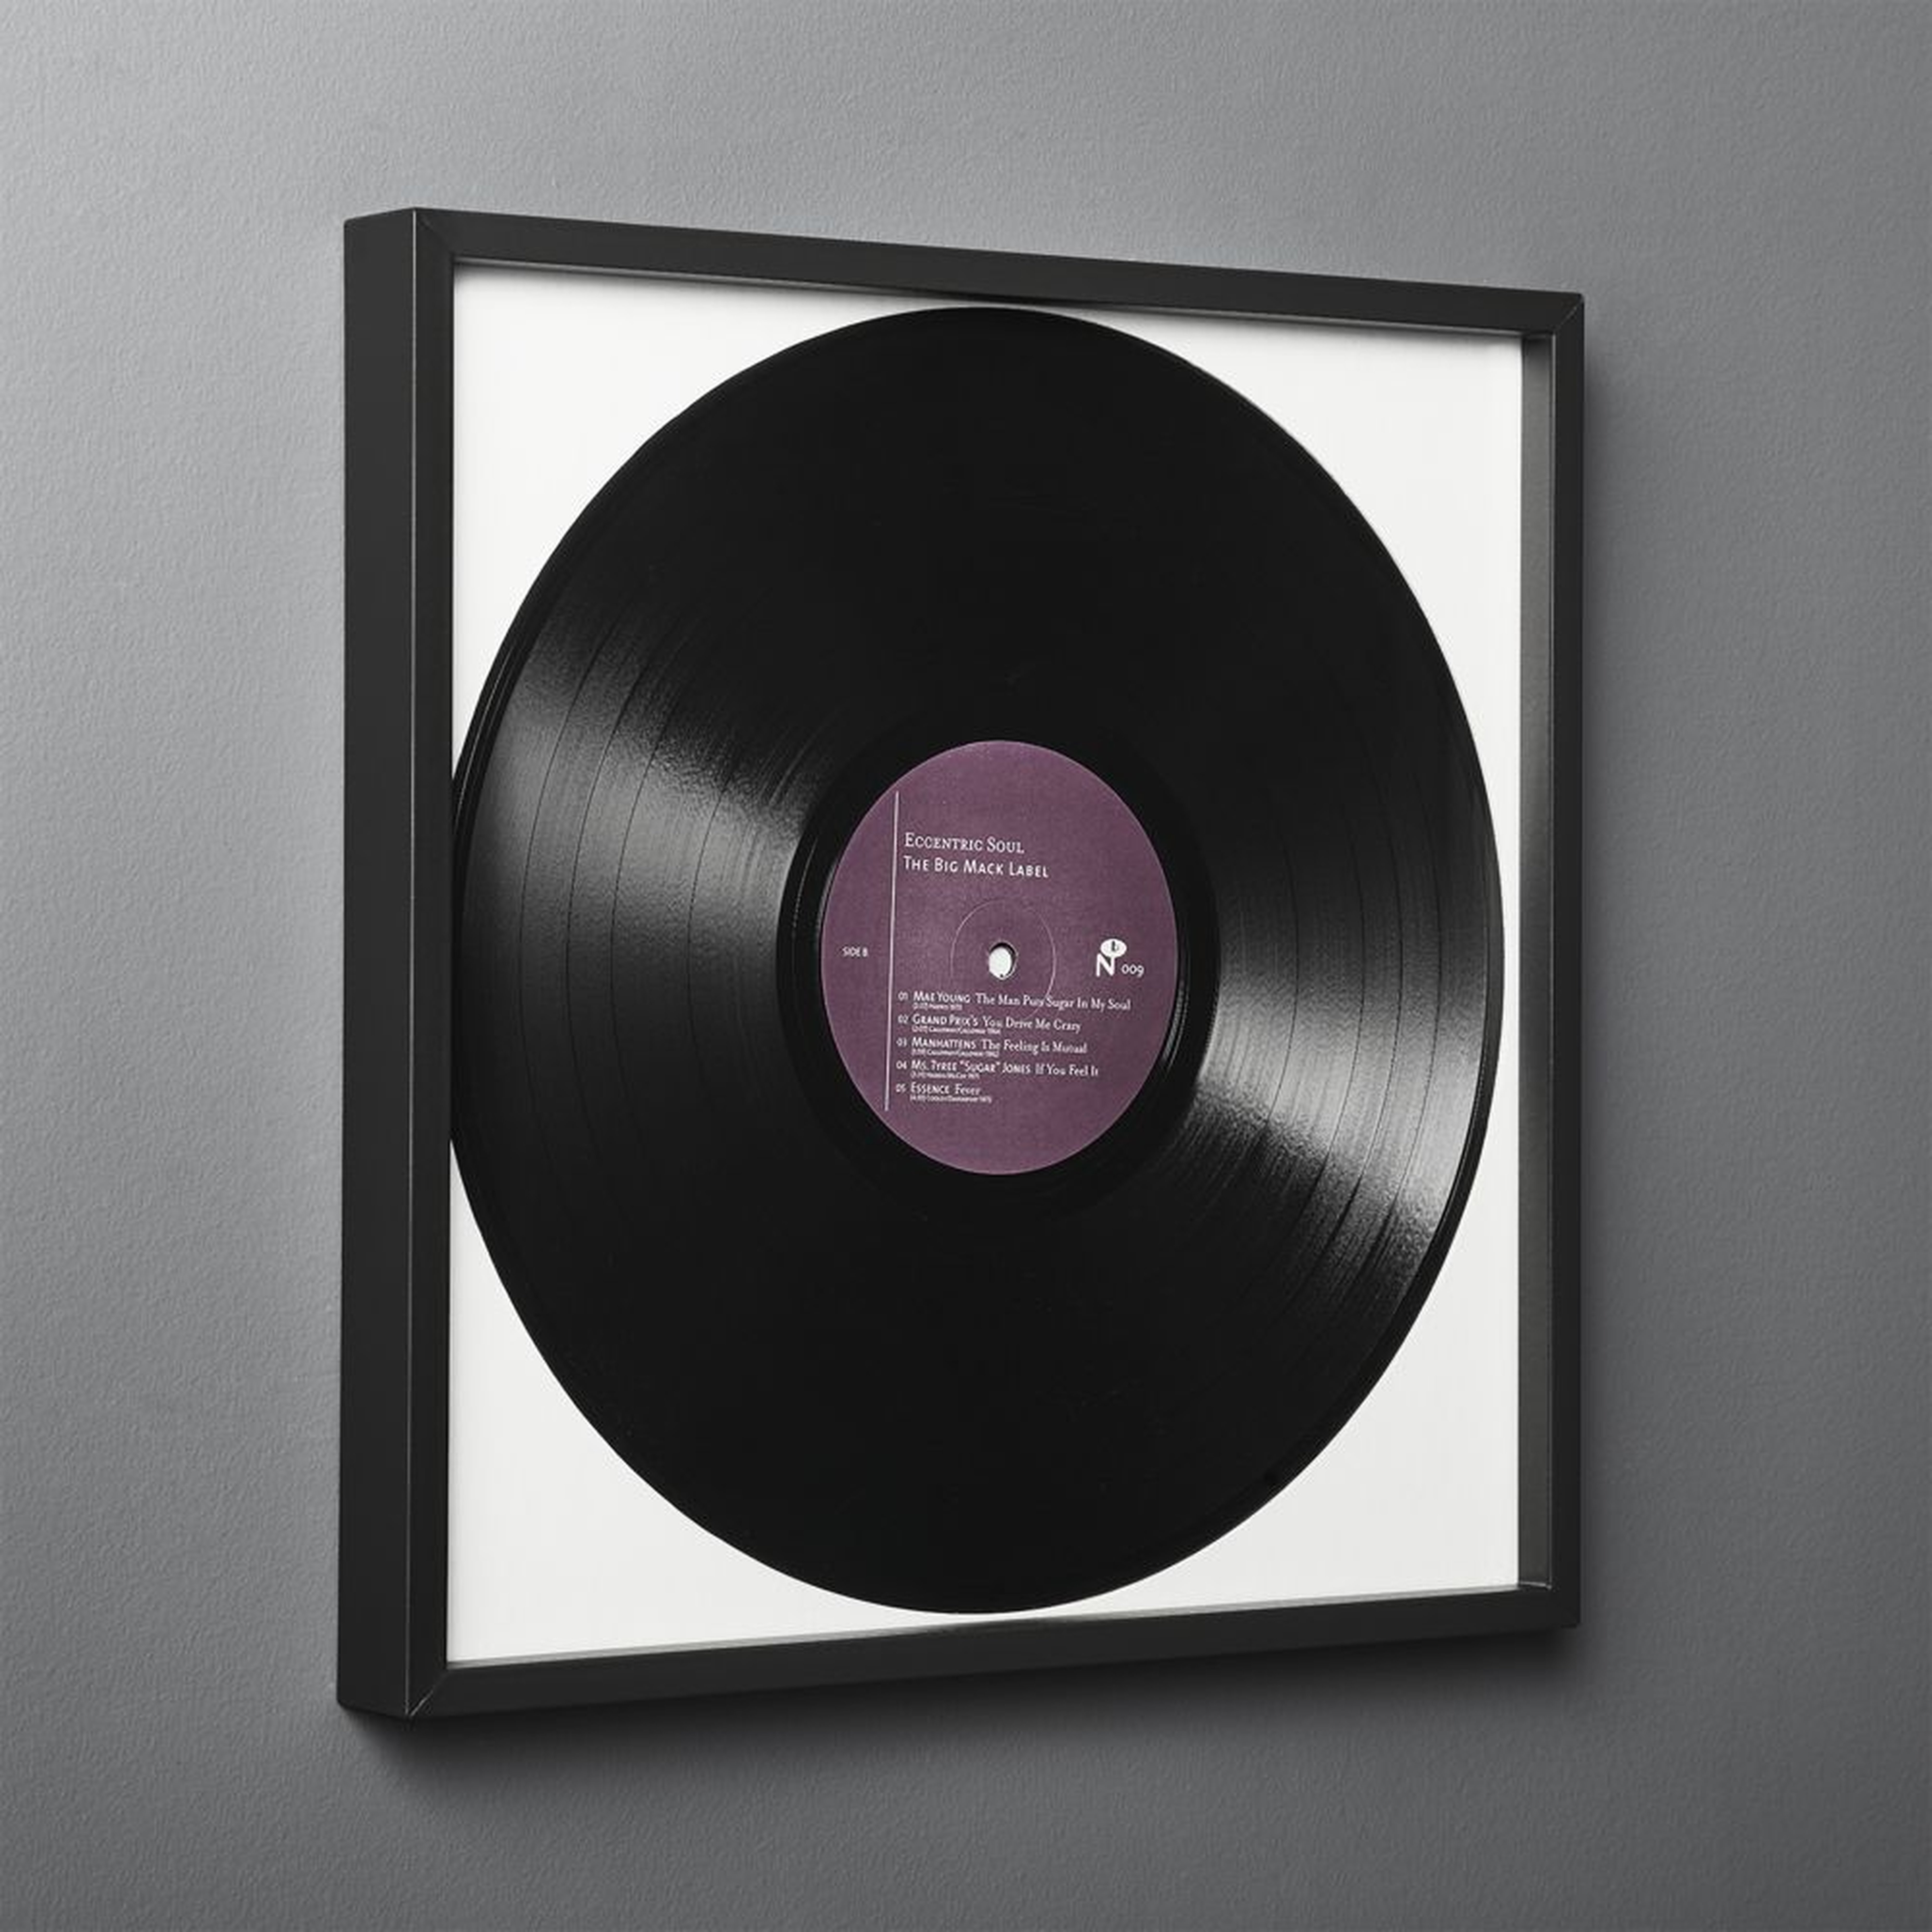 Gallery Black Record Frame with White Mat - CB2